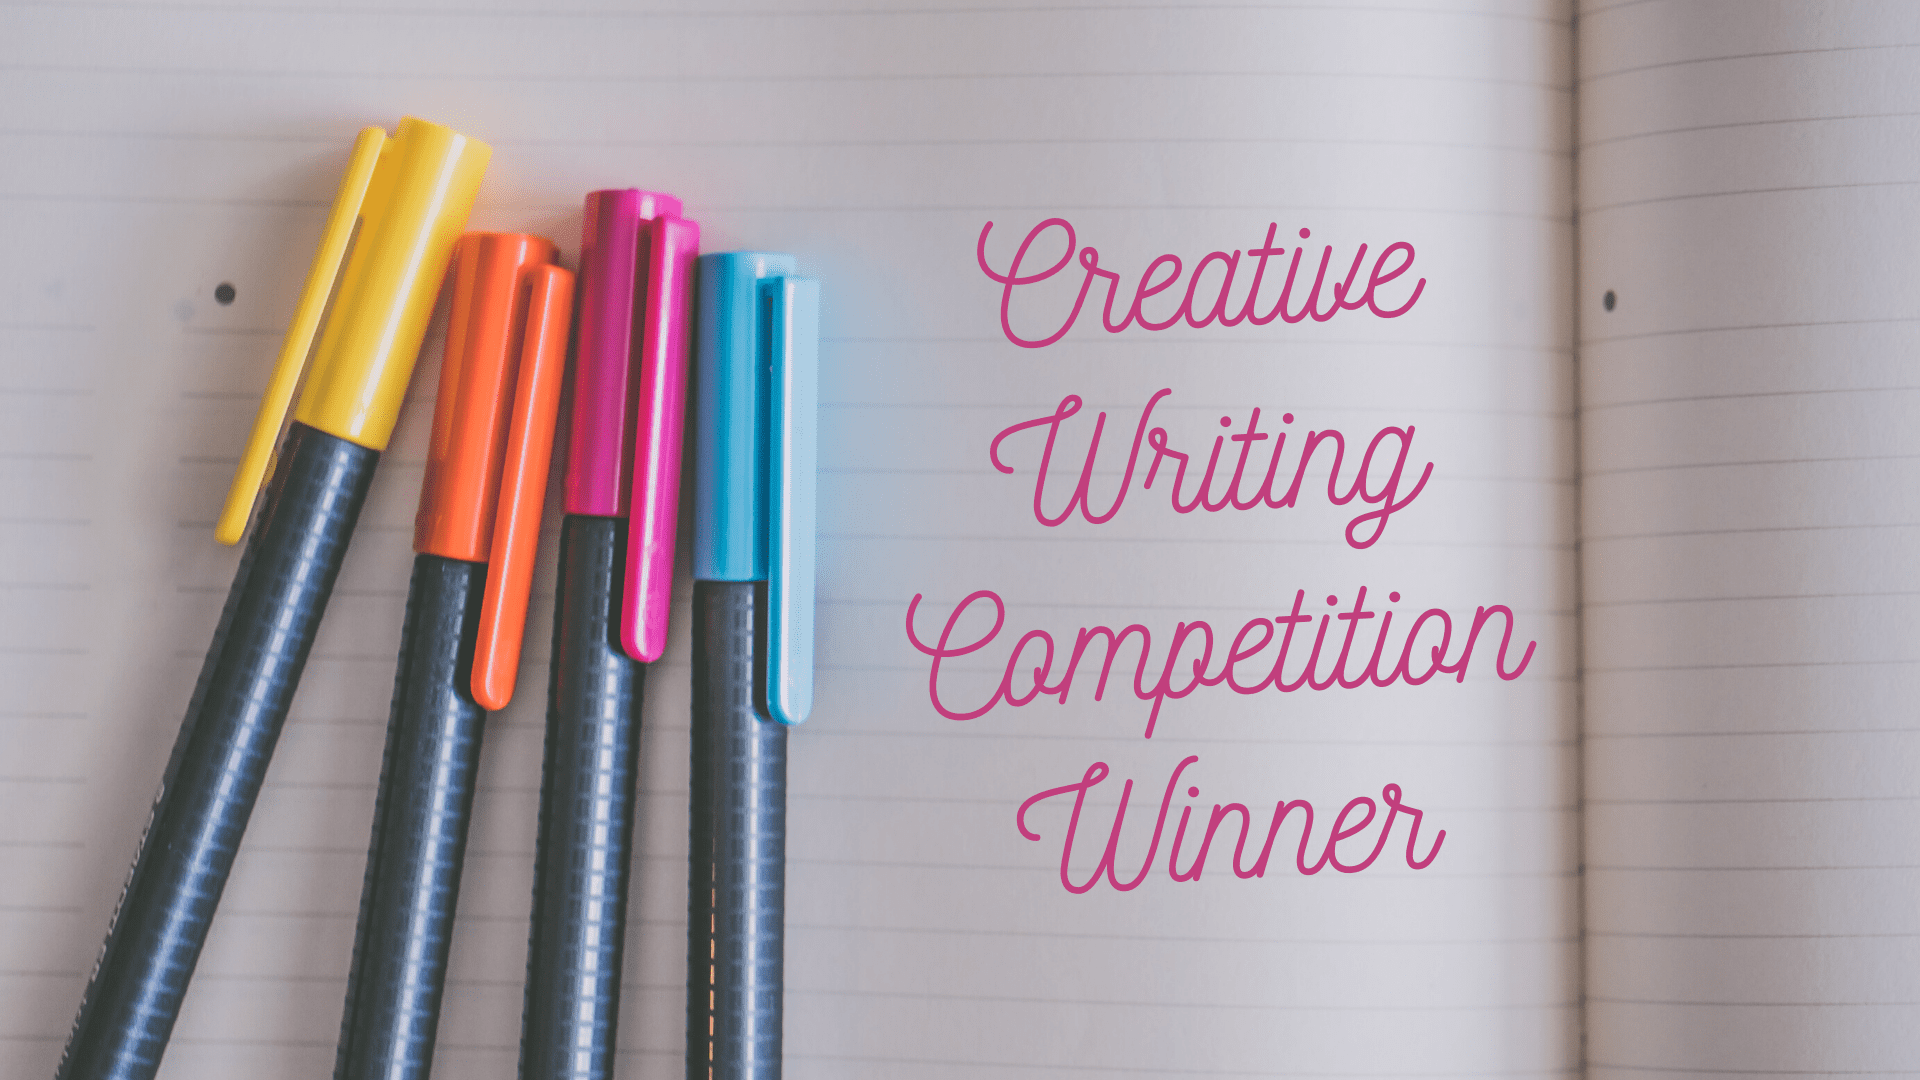 how to win creative writing competition